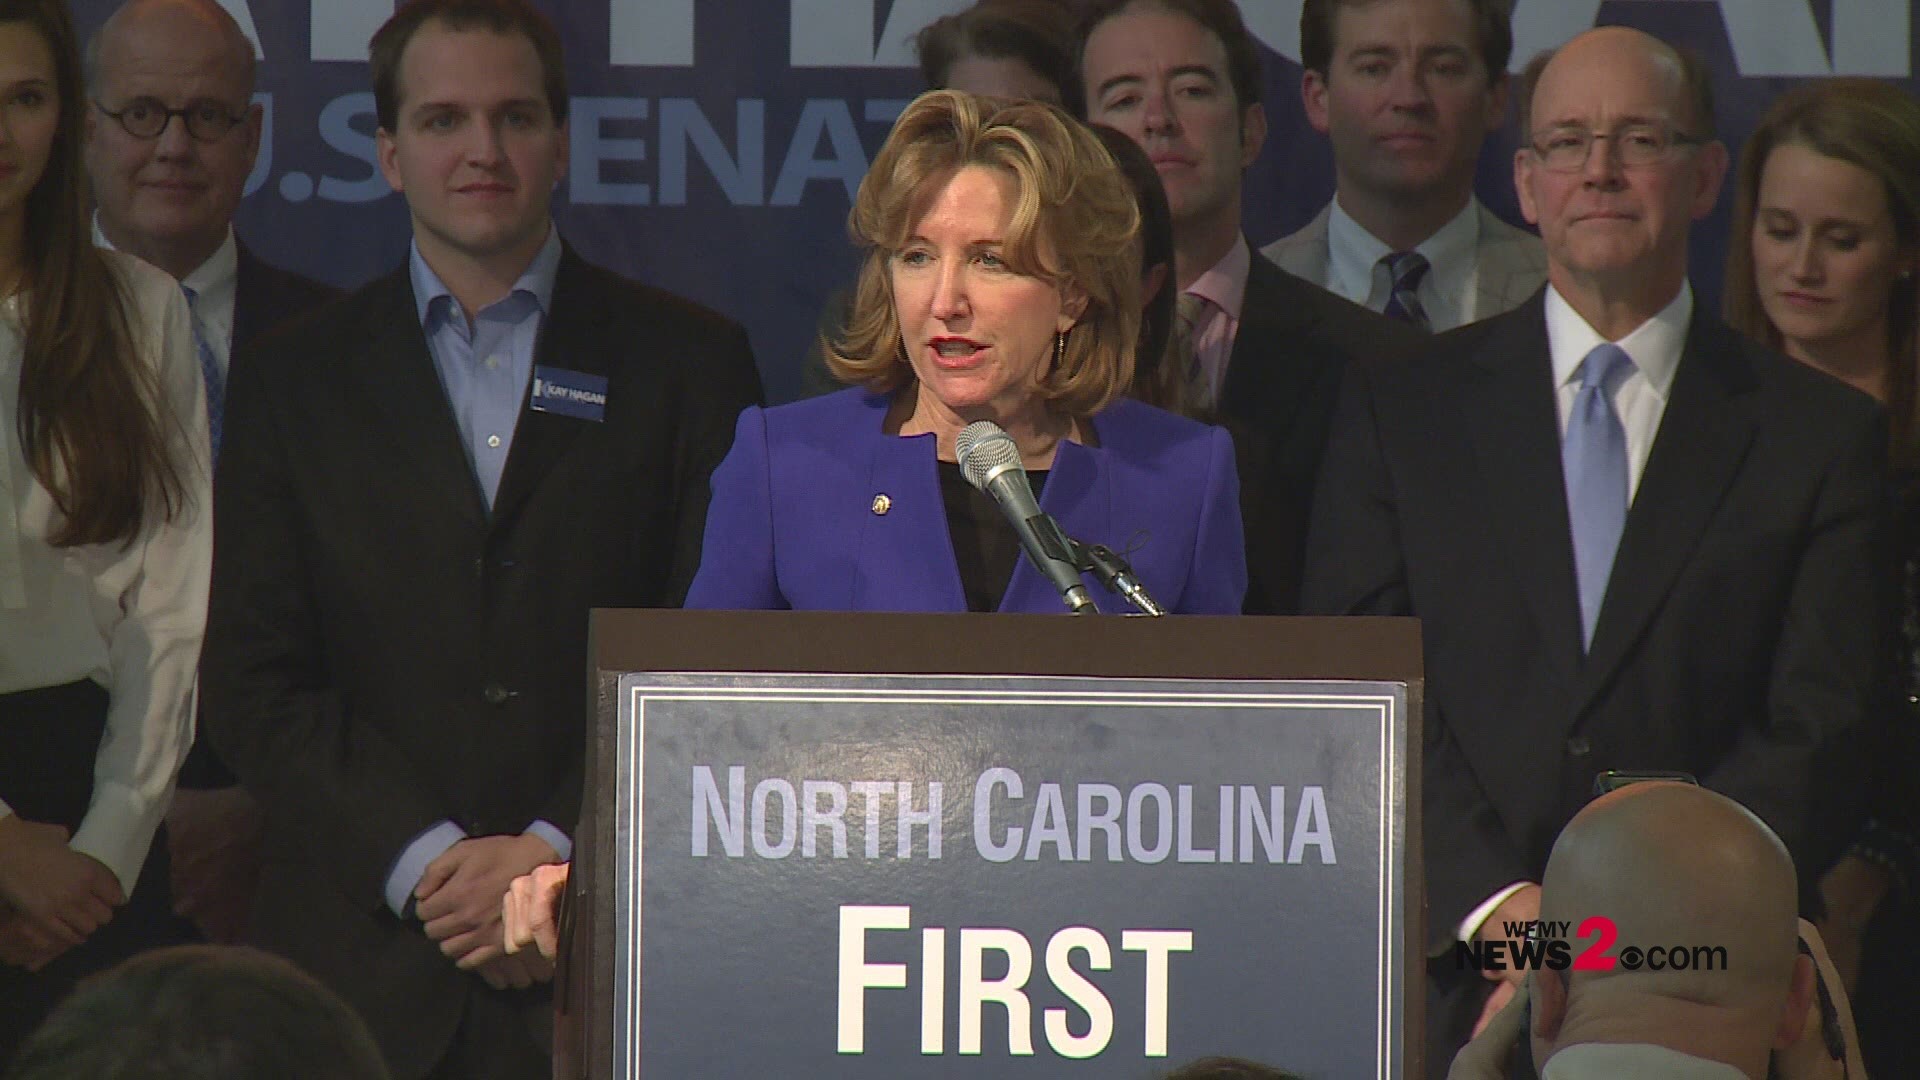 Kay Hagan, former U.S. Senator, has died at the age of 66, according to media reports. Hagan is from Greensboro and was elected to the Senate in 2008.